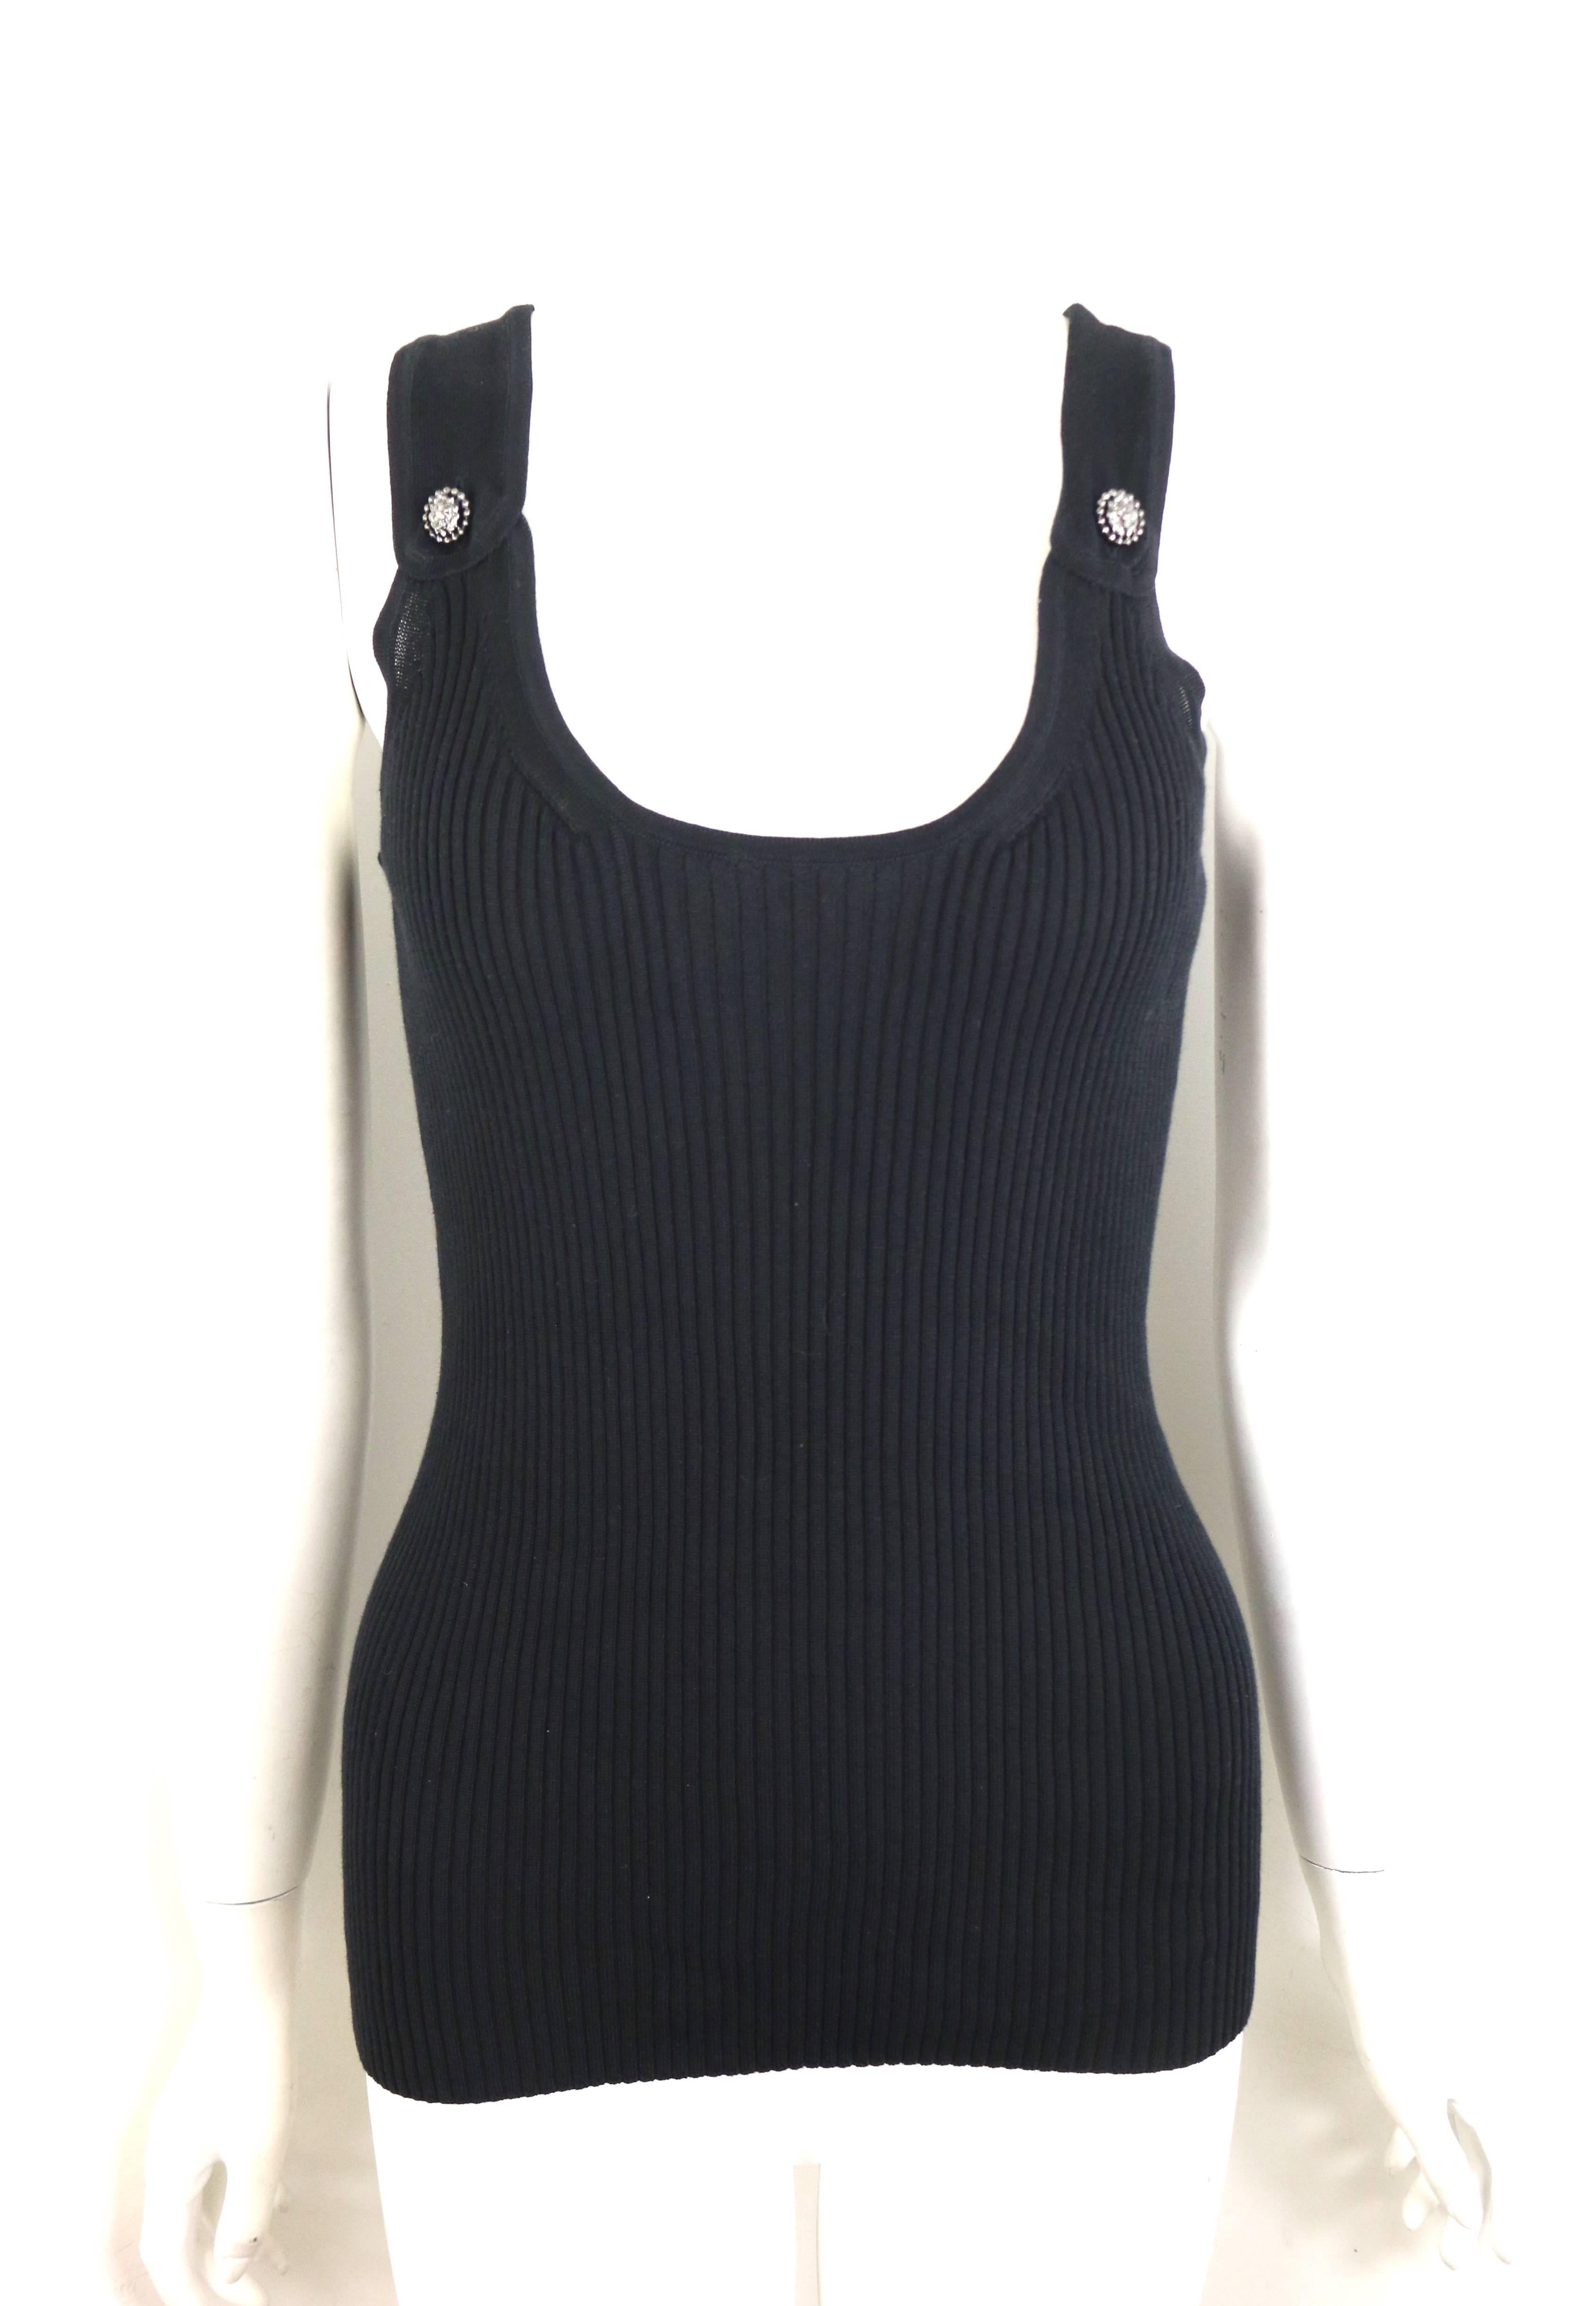 - Chanel black cotton knitted tank top. 

- Featuring two 